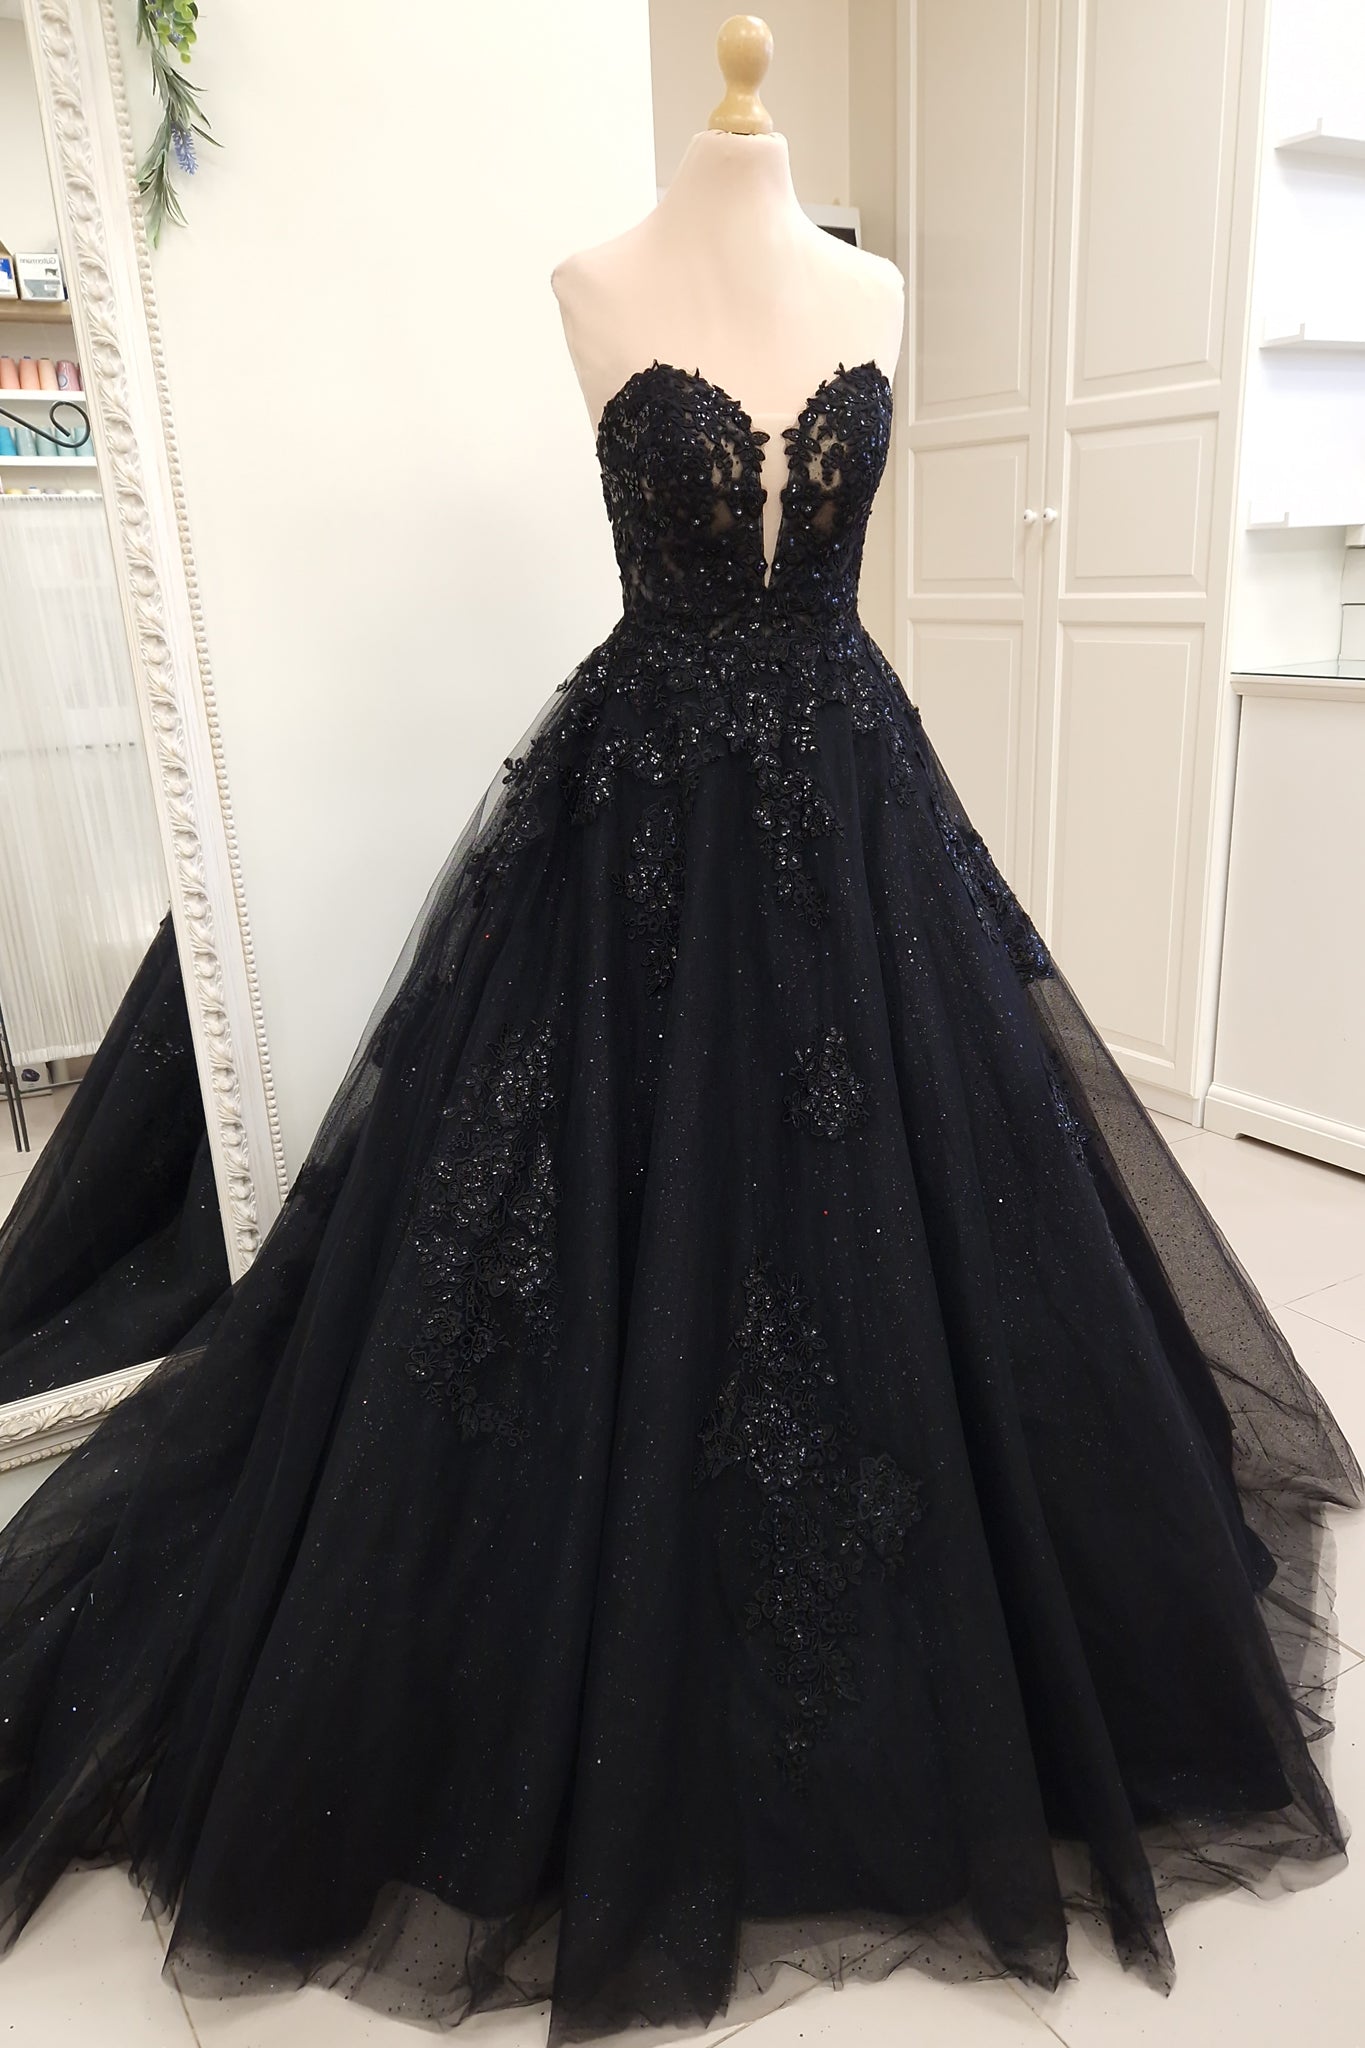 Black wedding dress in ball gown silhouette with deep plunging sweetheart neckline, detachable off-shoulder straps and semi-sheer corset bodice.